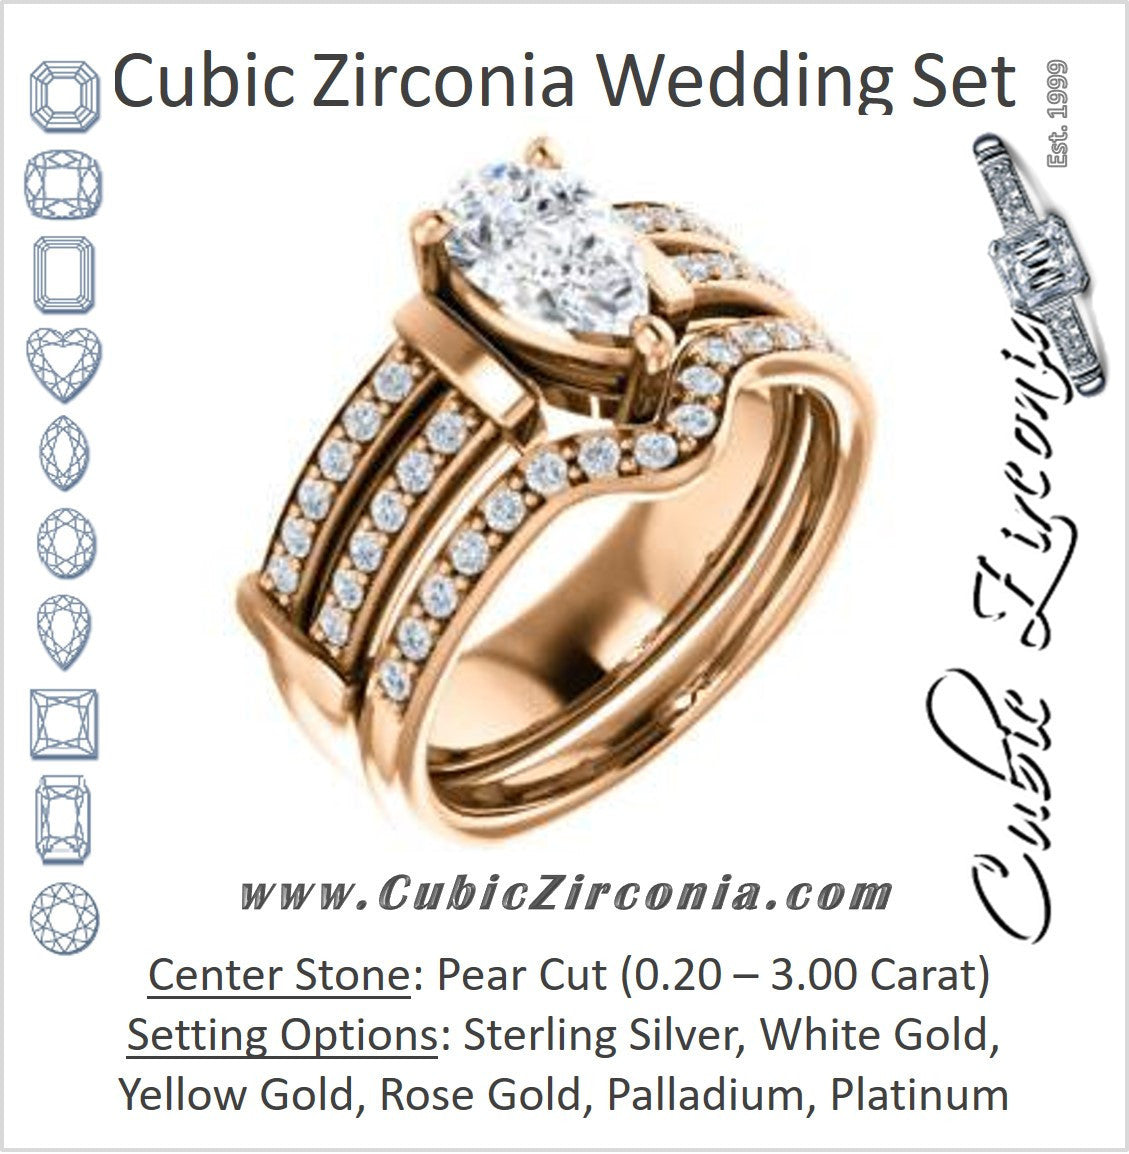 CZ Wedding Set, featuring The Rachana engagement ring (Customizable Pear Cut Design with Wide Split-Pavé Band and Euro Shank)